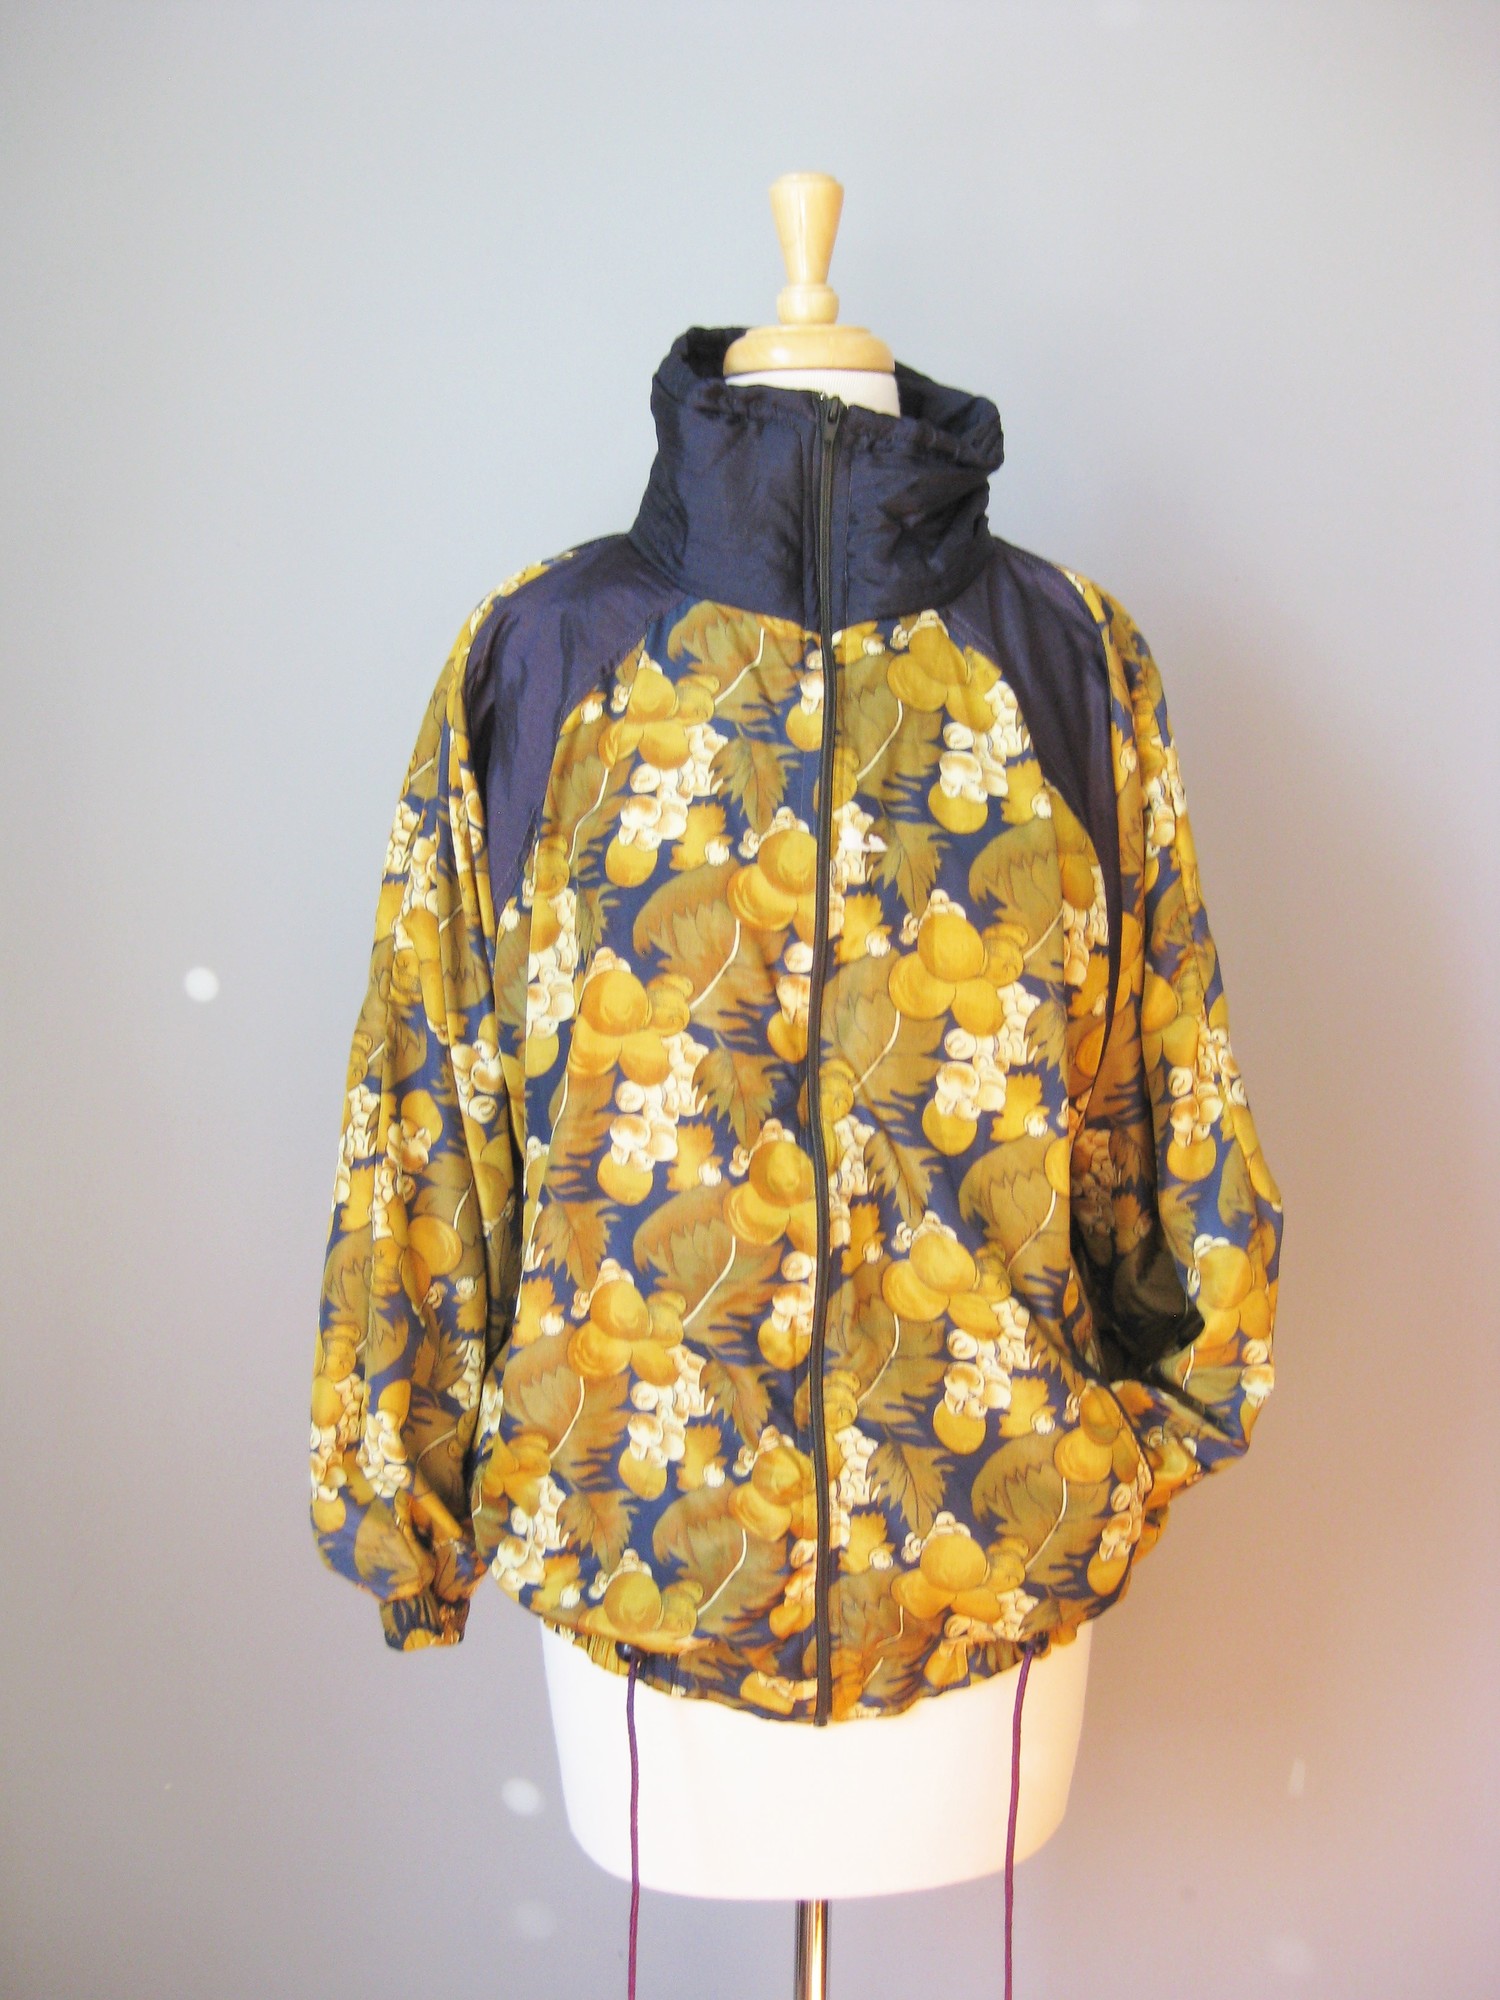 Navy Blue & gold fall floral print bomber jacket from the 1980s by Great Gear Clothing Co.
High funnel neck
elasticized waist and cuffs
Shell is 100% nylon
Fully lined in poly cotton blend
Shoulder pads
zipper Pockets
Drawstring hip
made in Pakistan
Markeed size small but should fit almost anyone!
flat measurements:
armpit to armpit: 24in
length: 26in
shoulder to shoulder: 17in
thanks for looking!
#14550